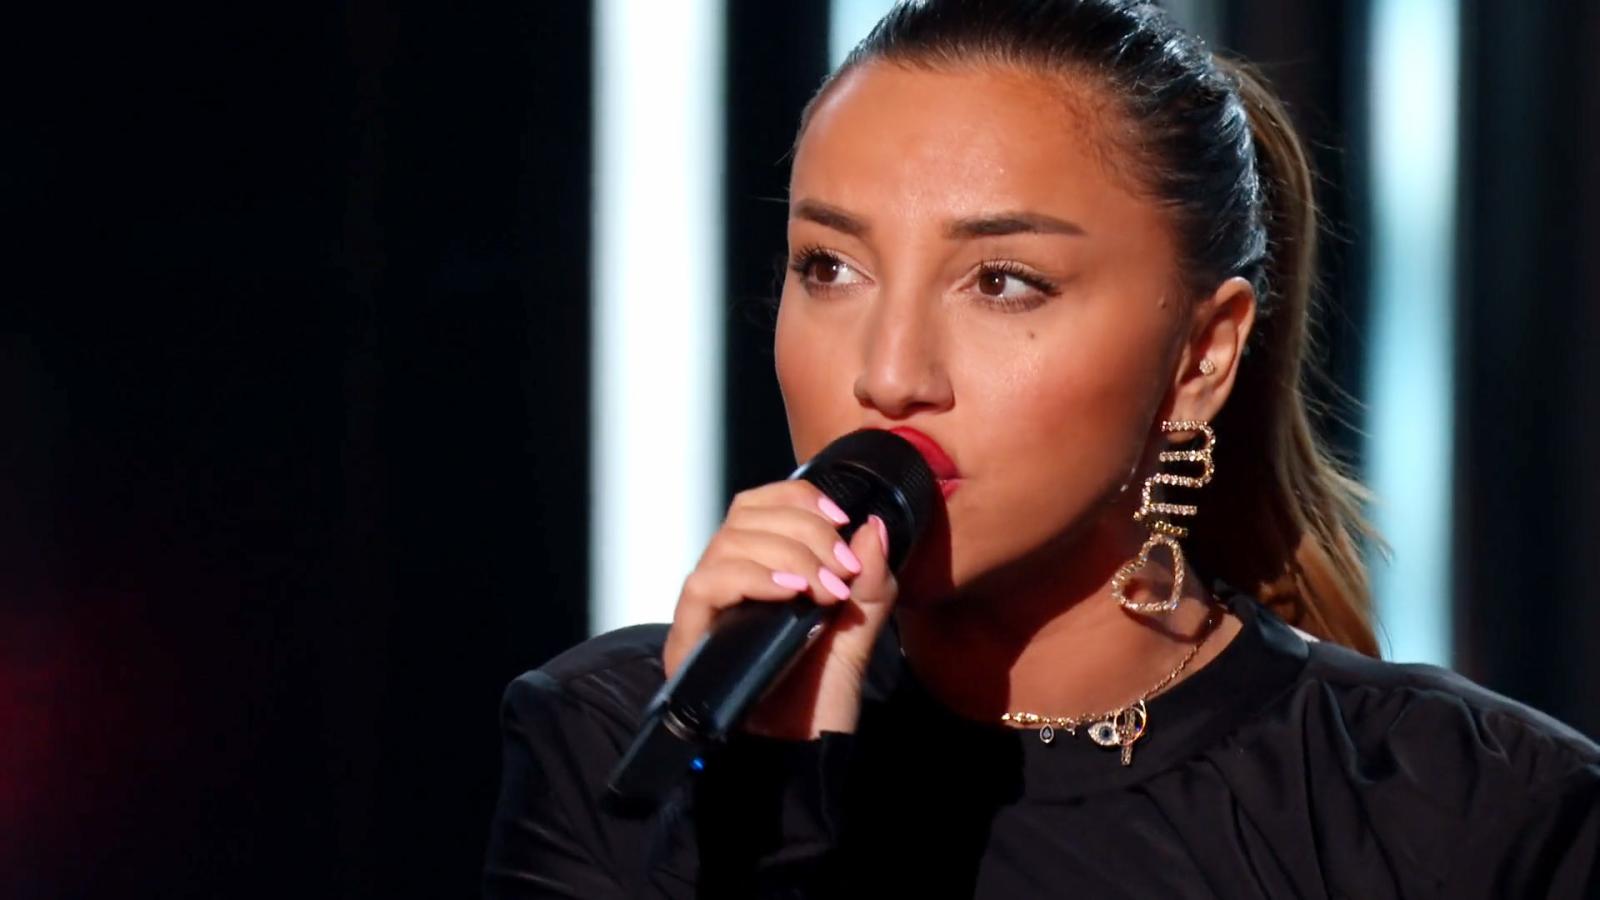 Nutsa Buzaladze 'Not Good Enough' for American Idol's Top 24, Fans Say - image 1